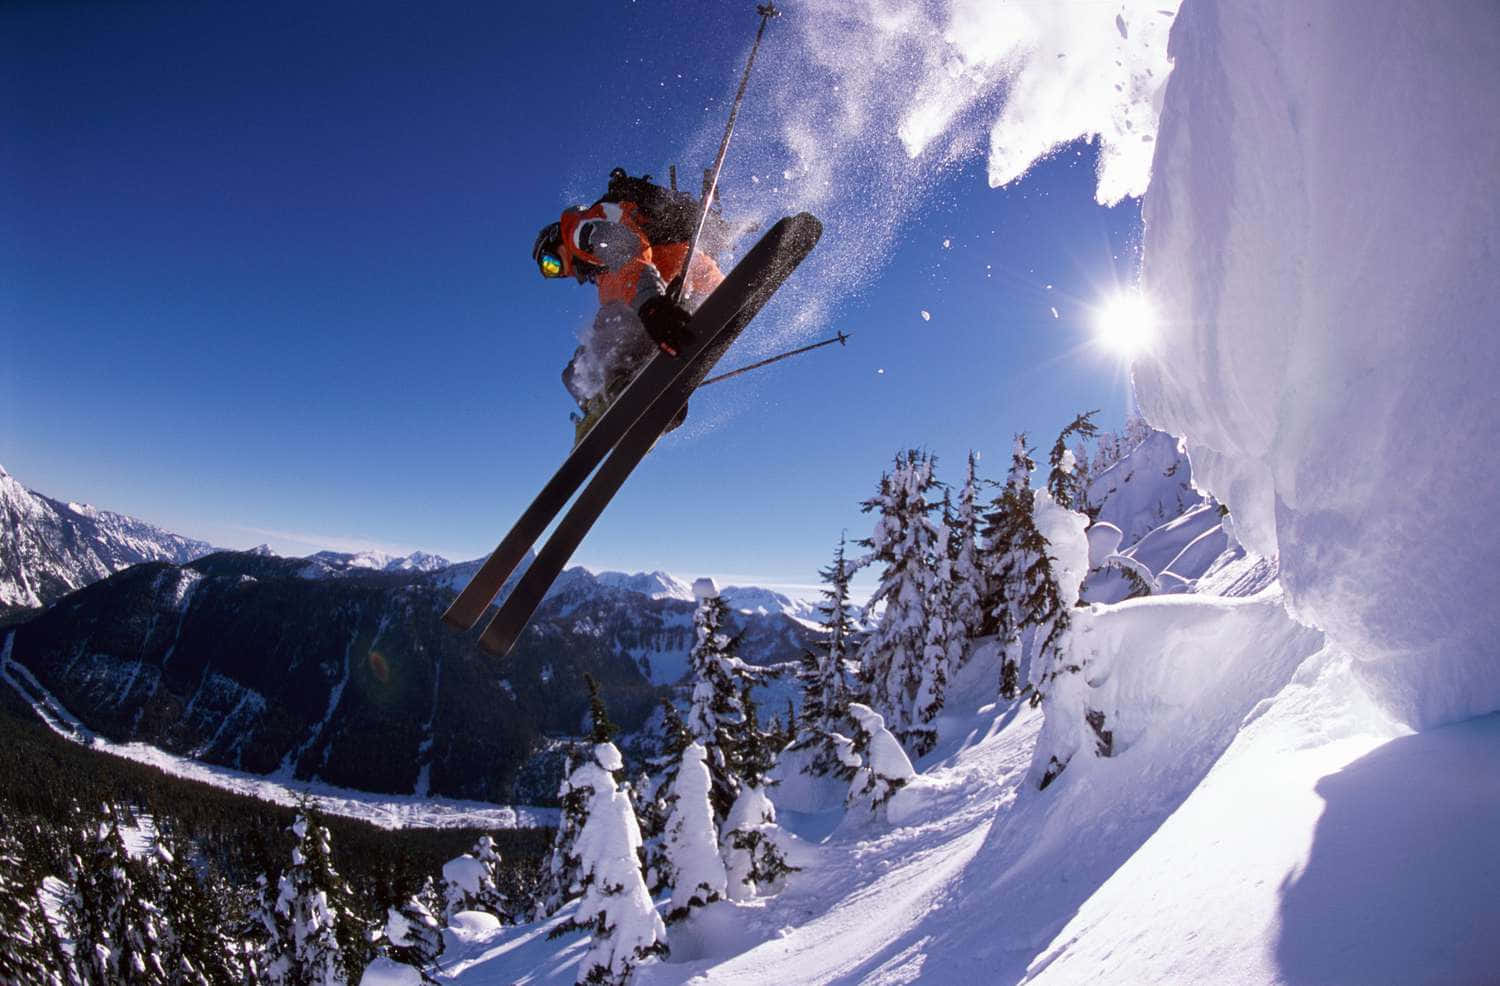 Captivating Moment of a Skier in the Snowy Mountains